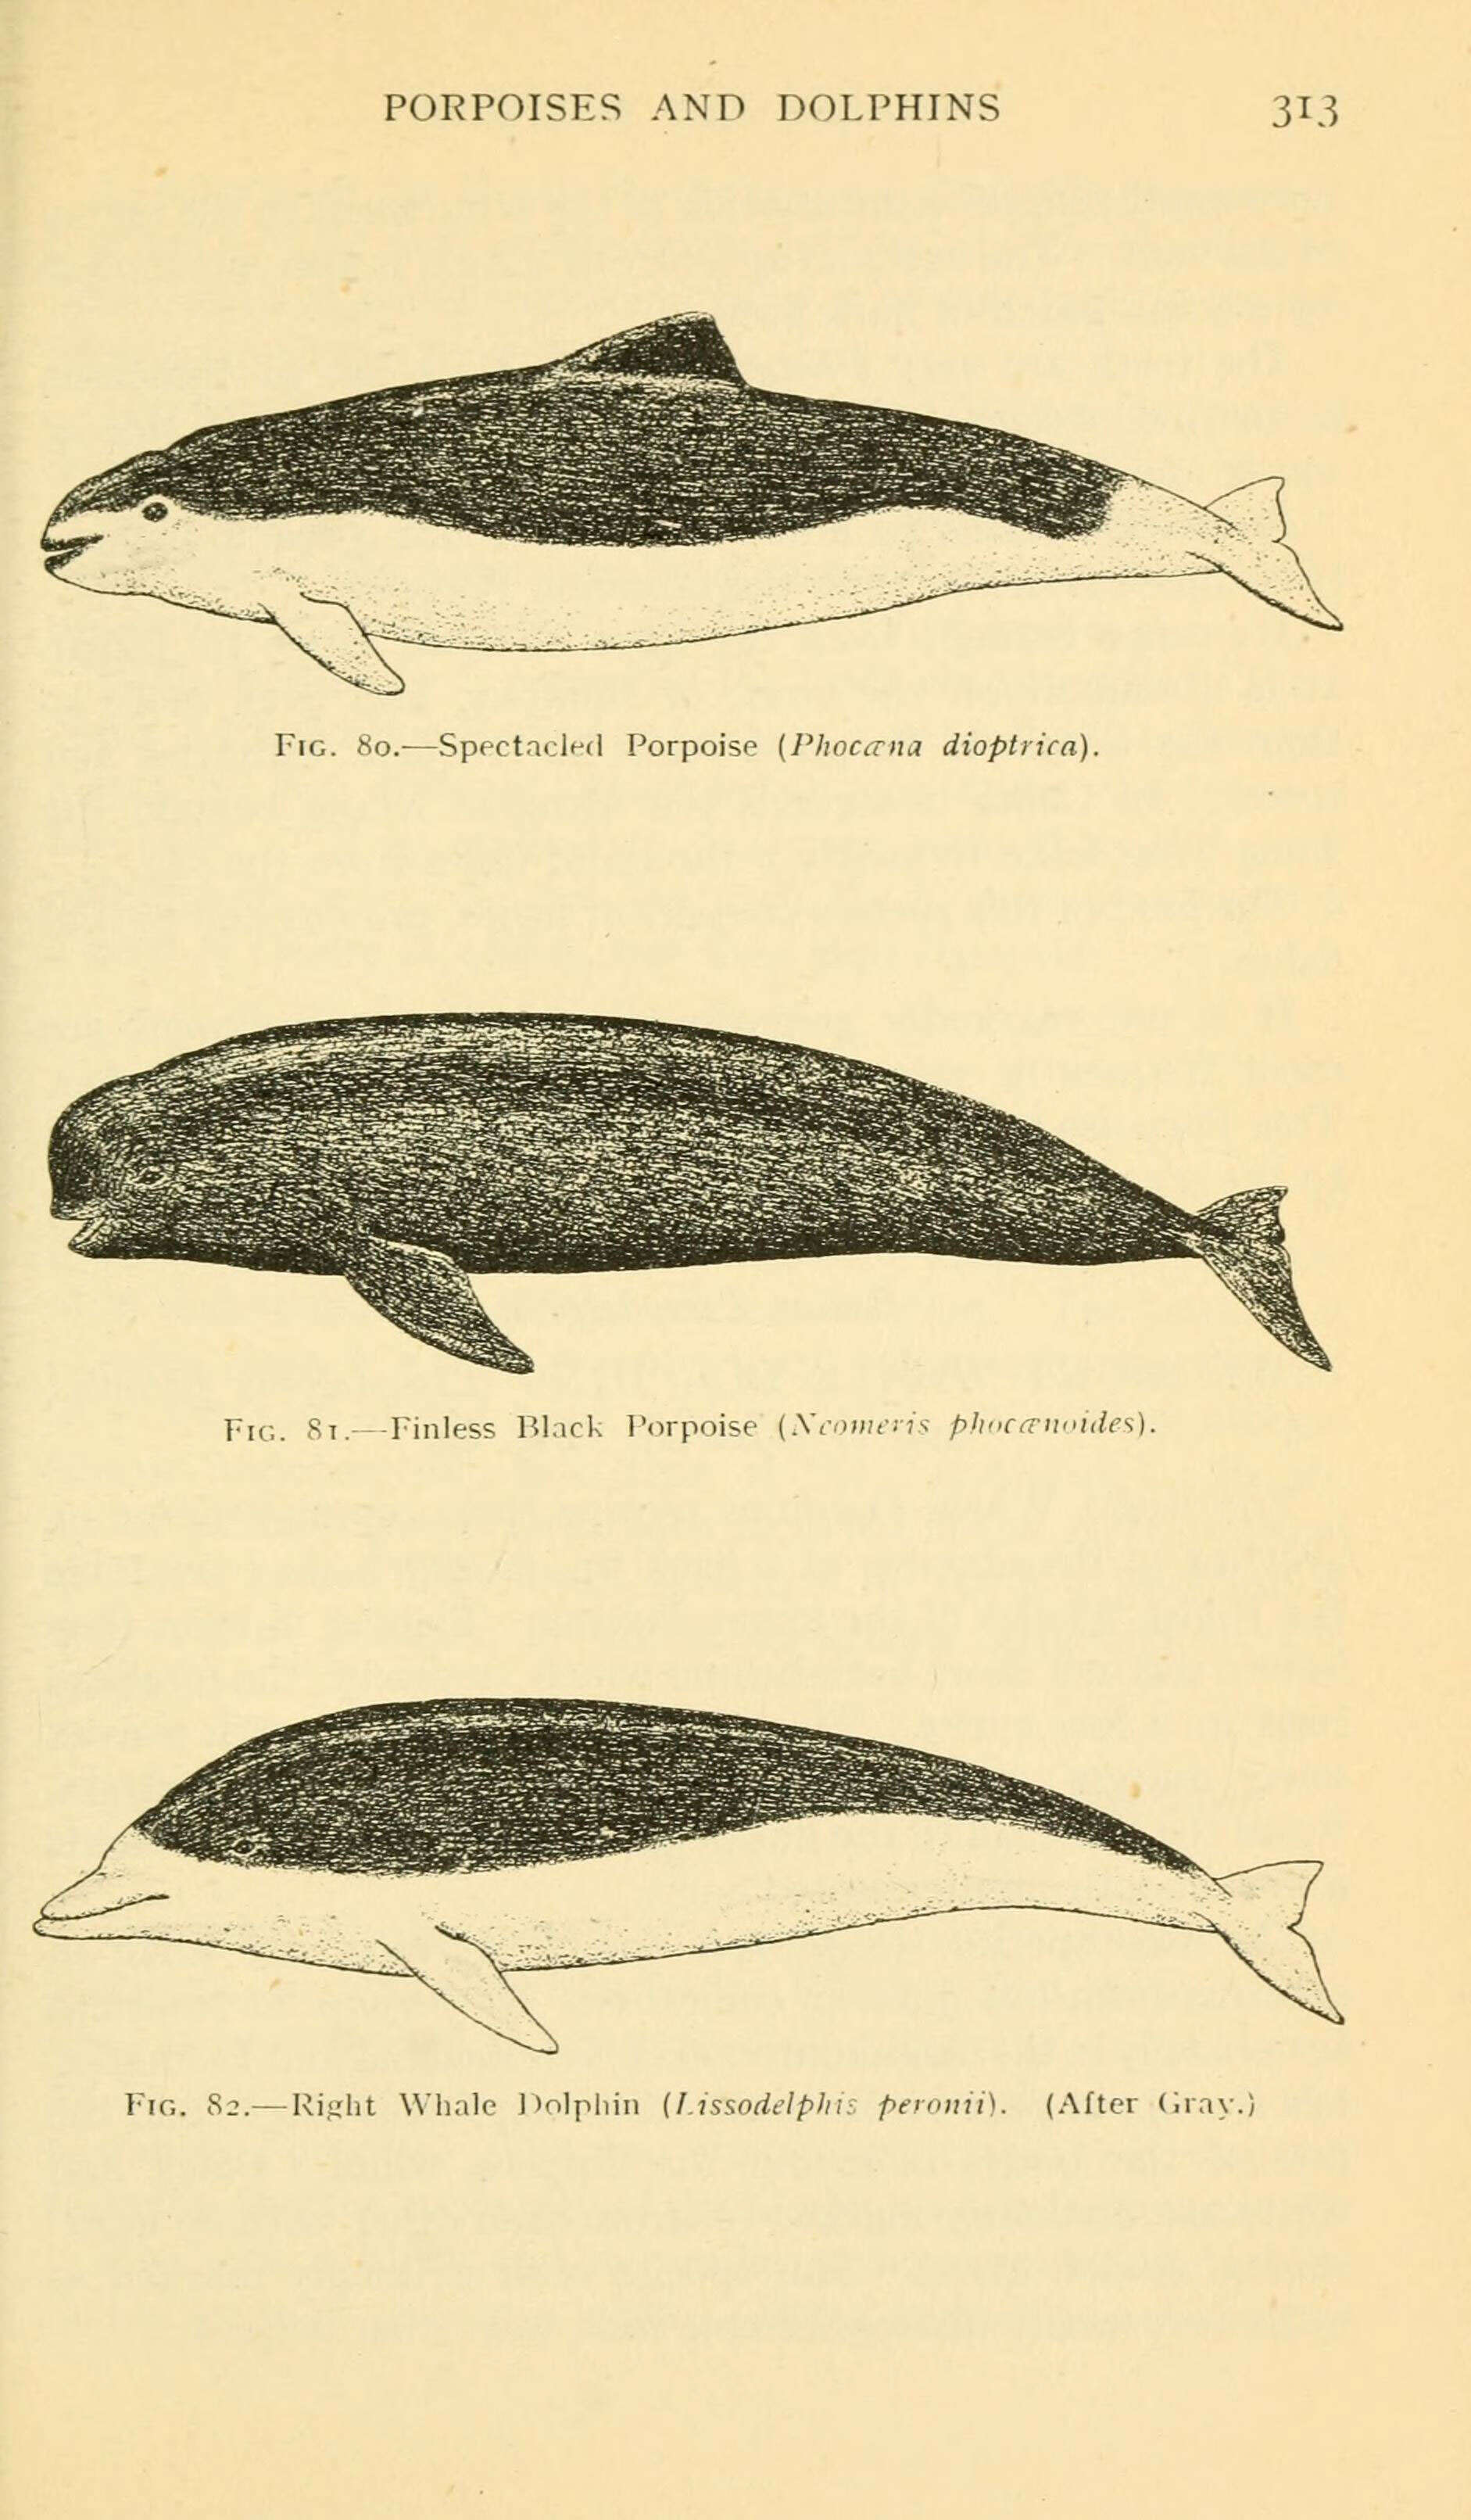 Image of whales and dolphins